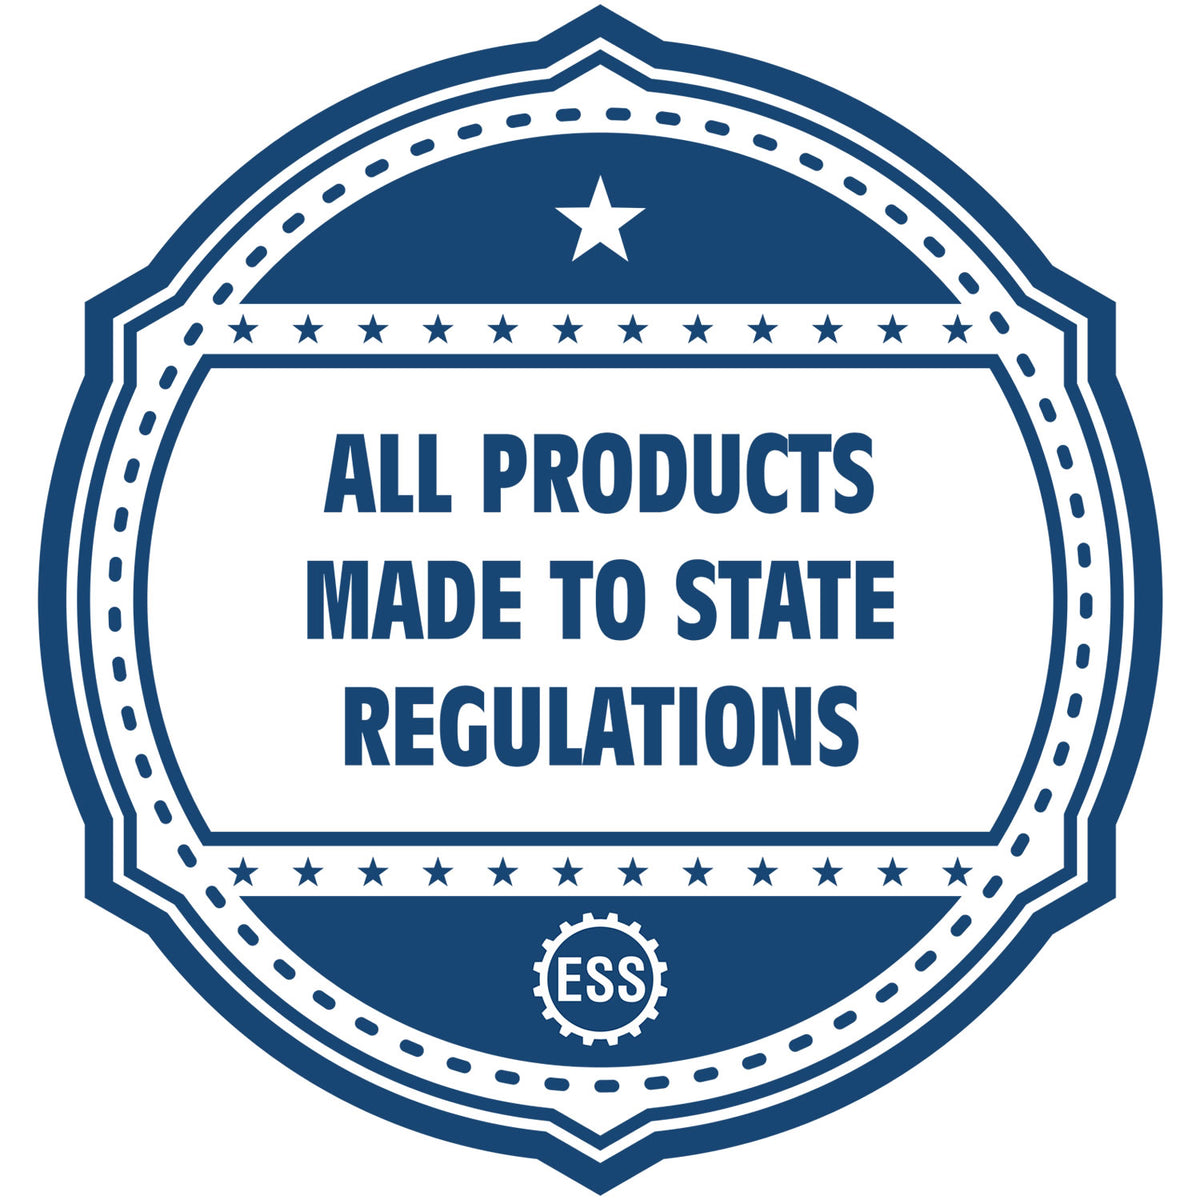 A blue icon or badge for the Slim Pre-Inked Missouri Professional Geologist Seal Stamp showing that this product is made in compliance with state regulations.